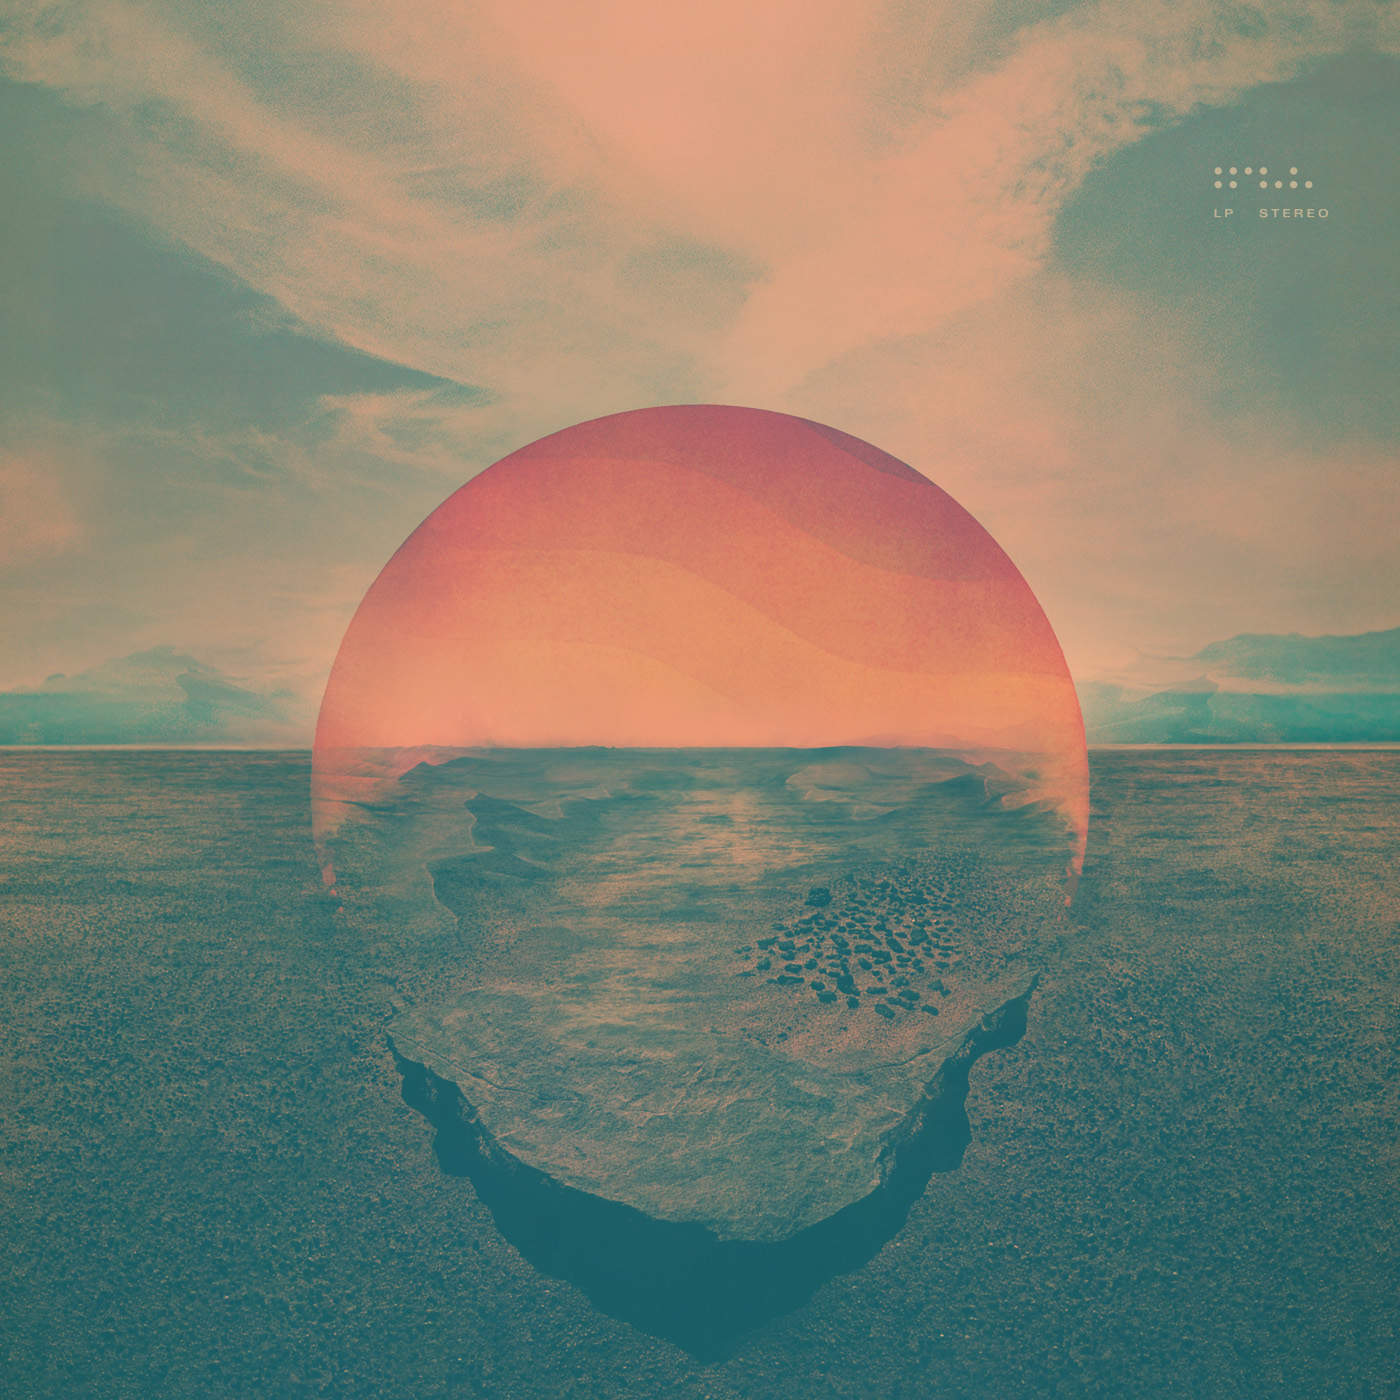 Art for A Walk by Tycho